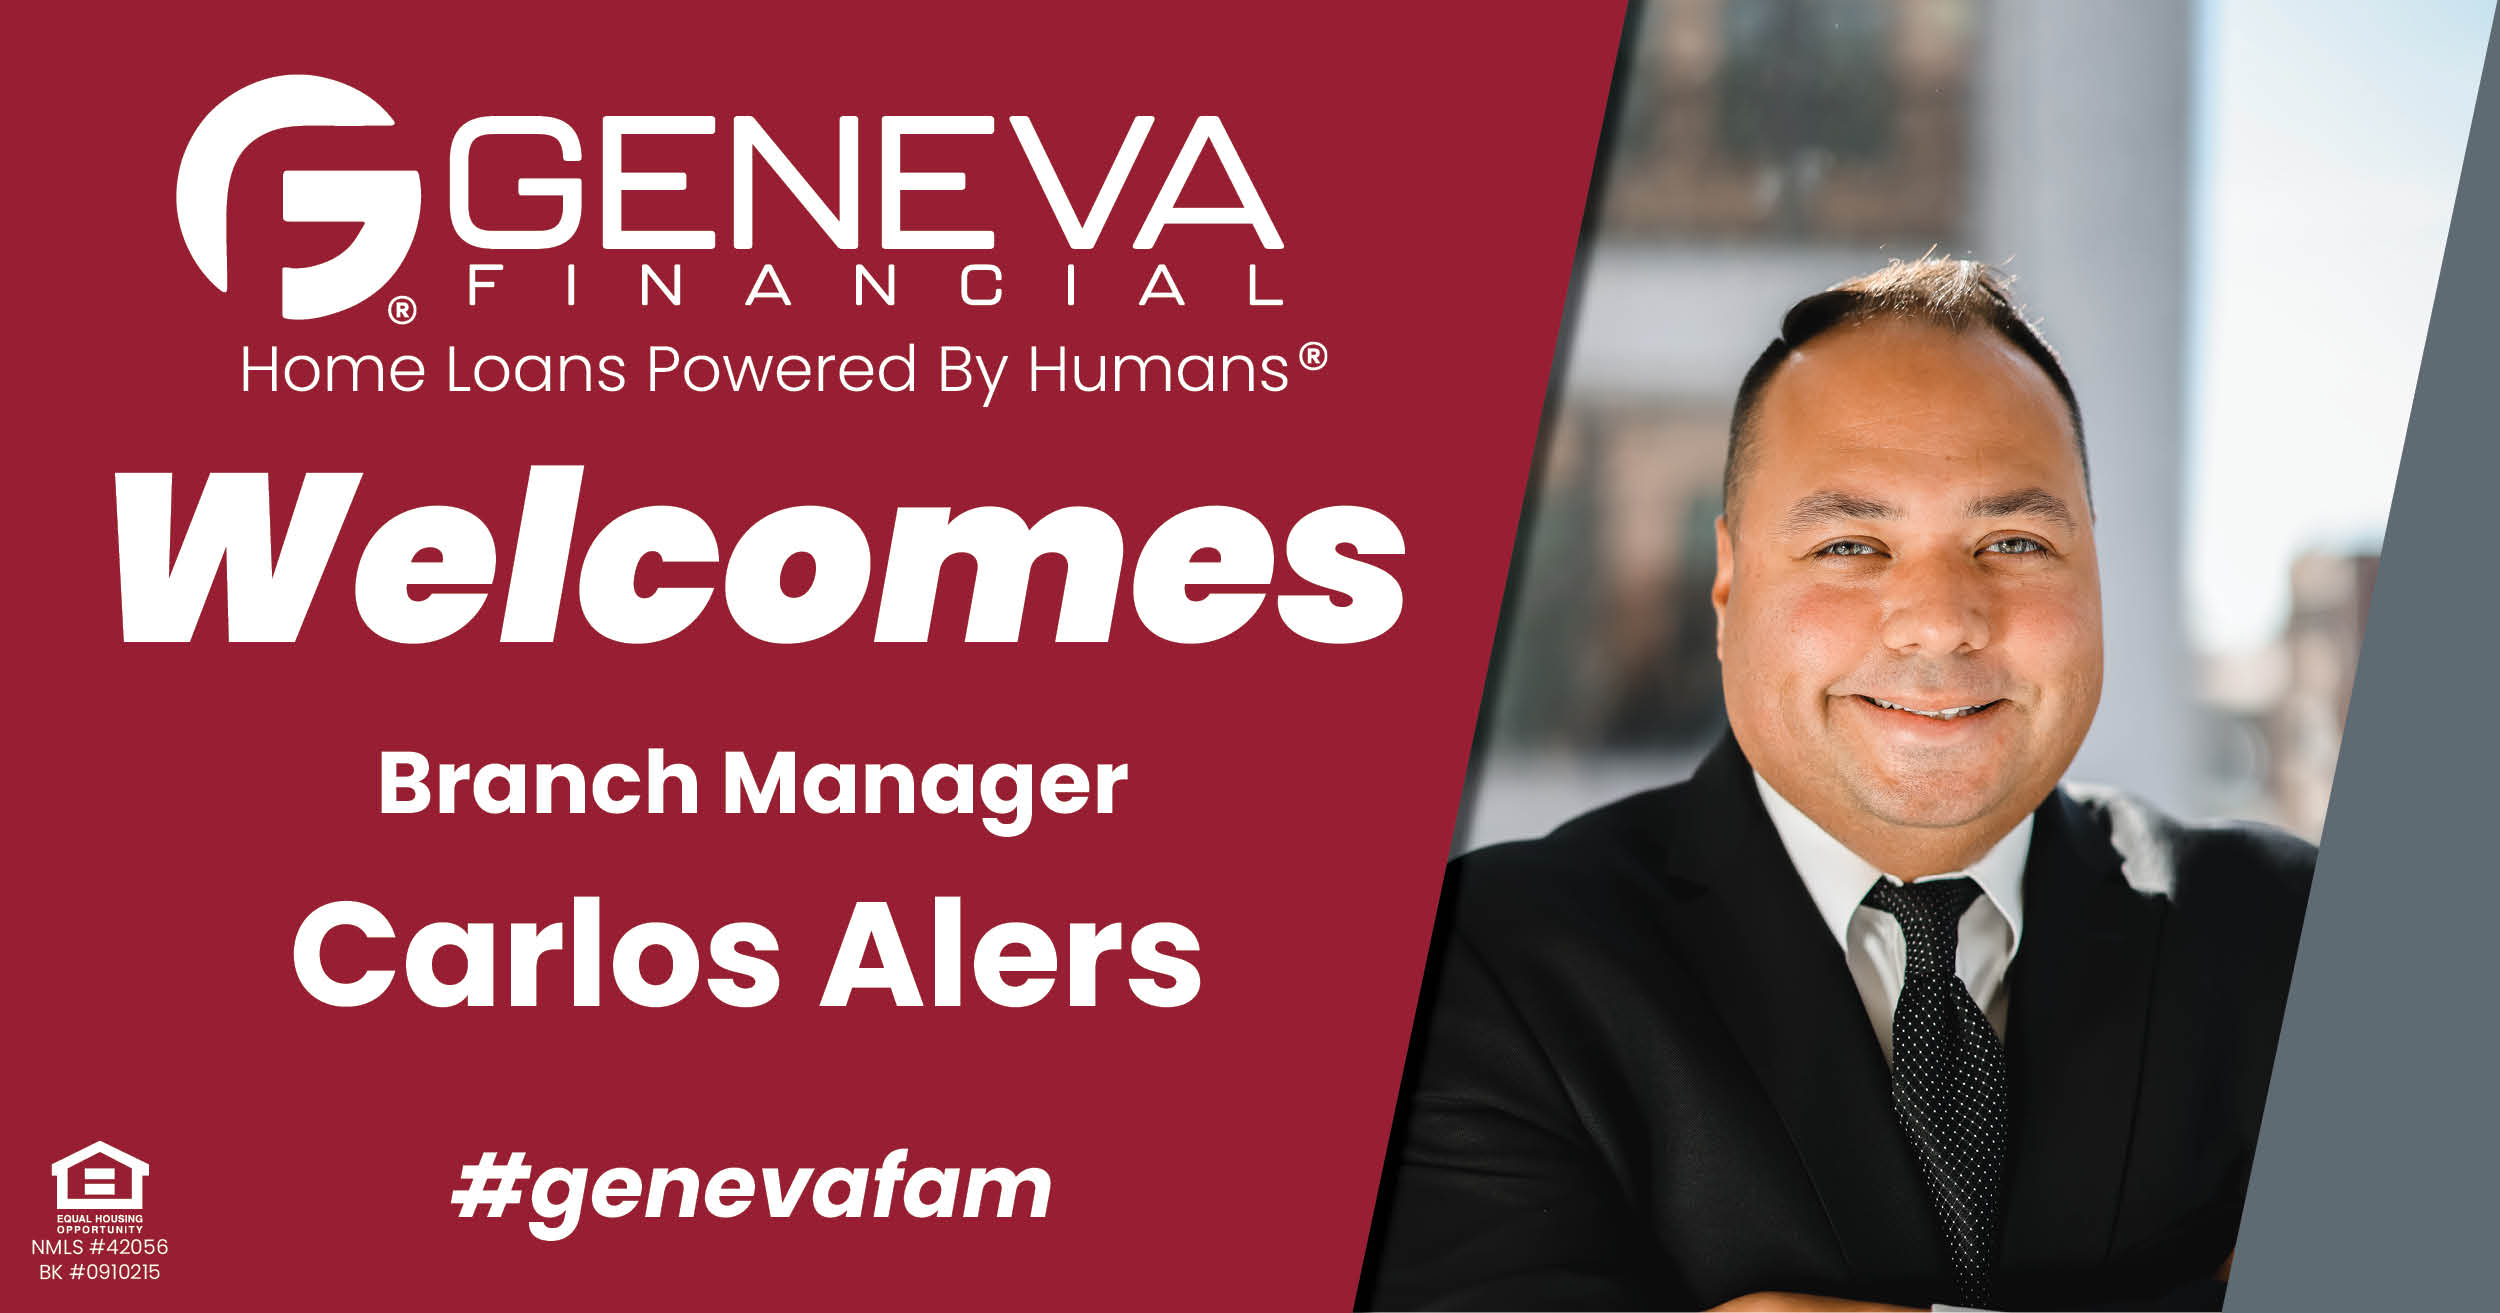 Geneva Financial Welcomes New Branch Manager Carlos Alers to Schaumburg, Illinois – Home Loans Powered by Humans®.